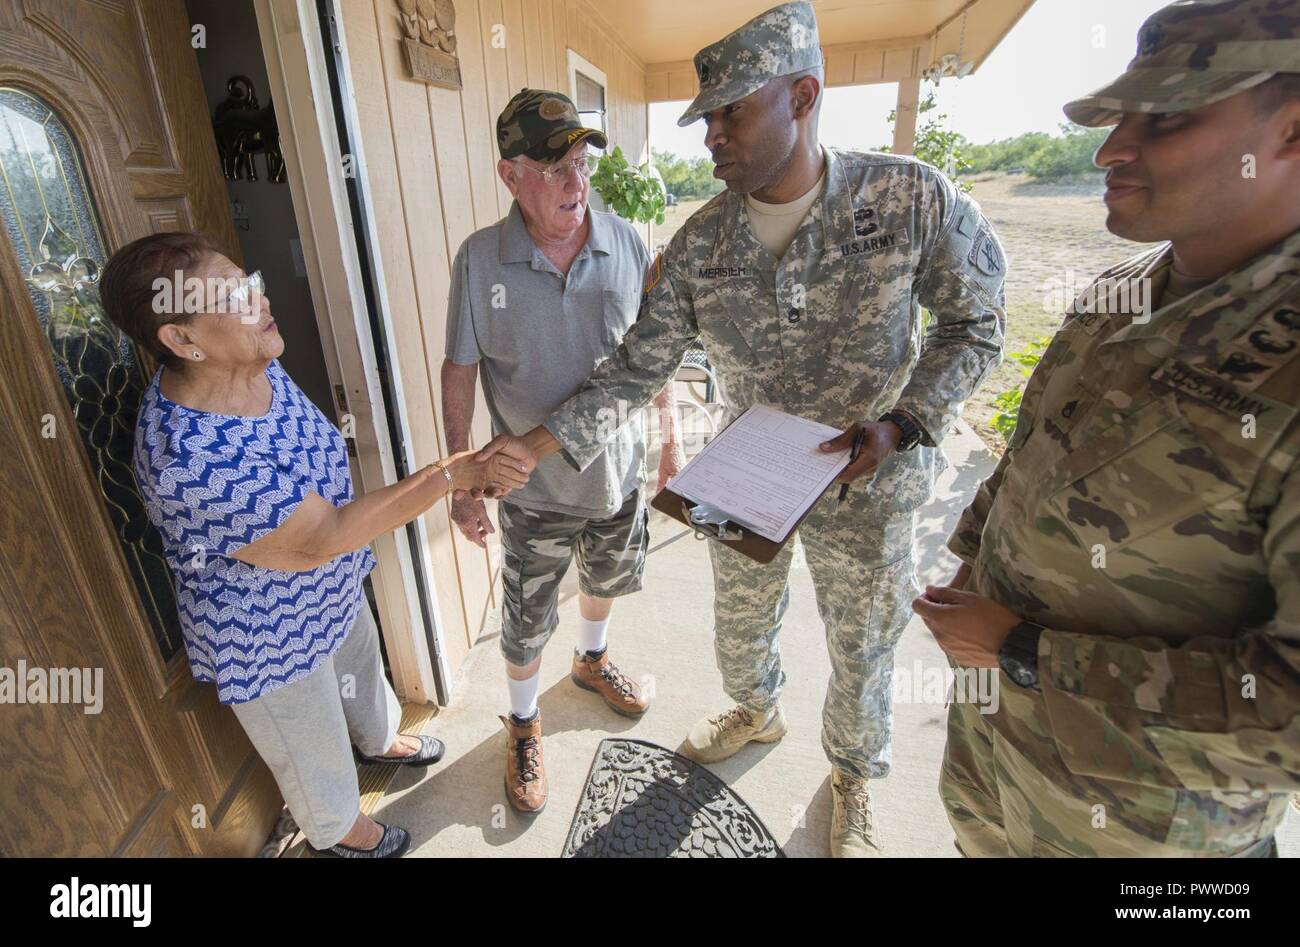 Sgt. 1st Class Rhody Merisier, middle right, and Staff Sgt. Aldo Blanco, both assigned to the 478th Civil Affairs Battalion based in Miami, conduct a survey with residents of a colonia currently without potable water near Laredo, Texas, June 23, 2017. Nearly 200 Reserve Soldiers are participating in an Innovative Readiness Training mission to improve infrastructures in colonias along the Texas-Mexico border. Stock Photo